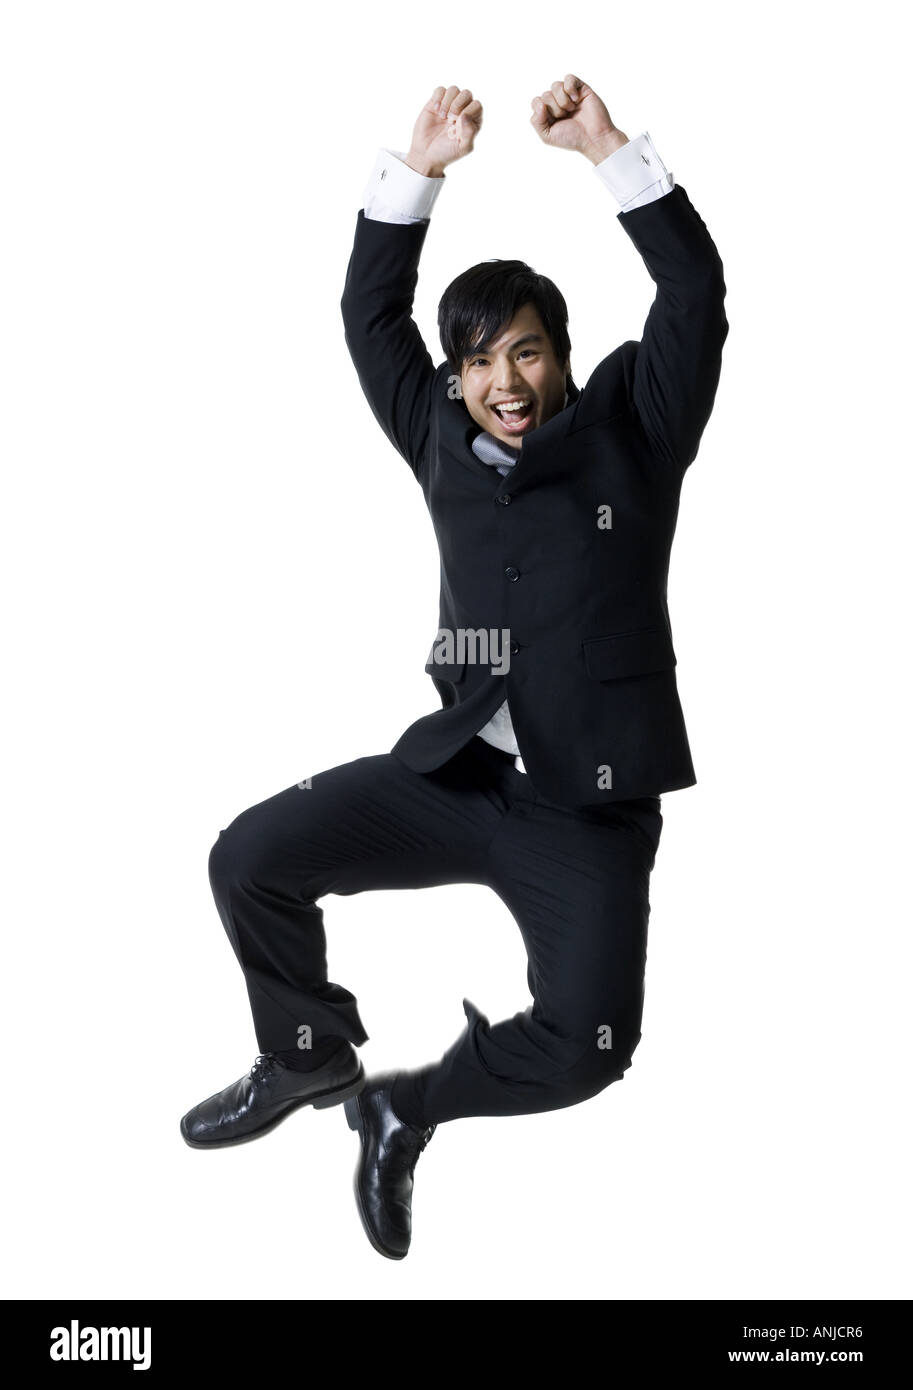 Low angle view of a business man jumping in mid air Stock Photo